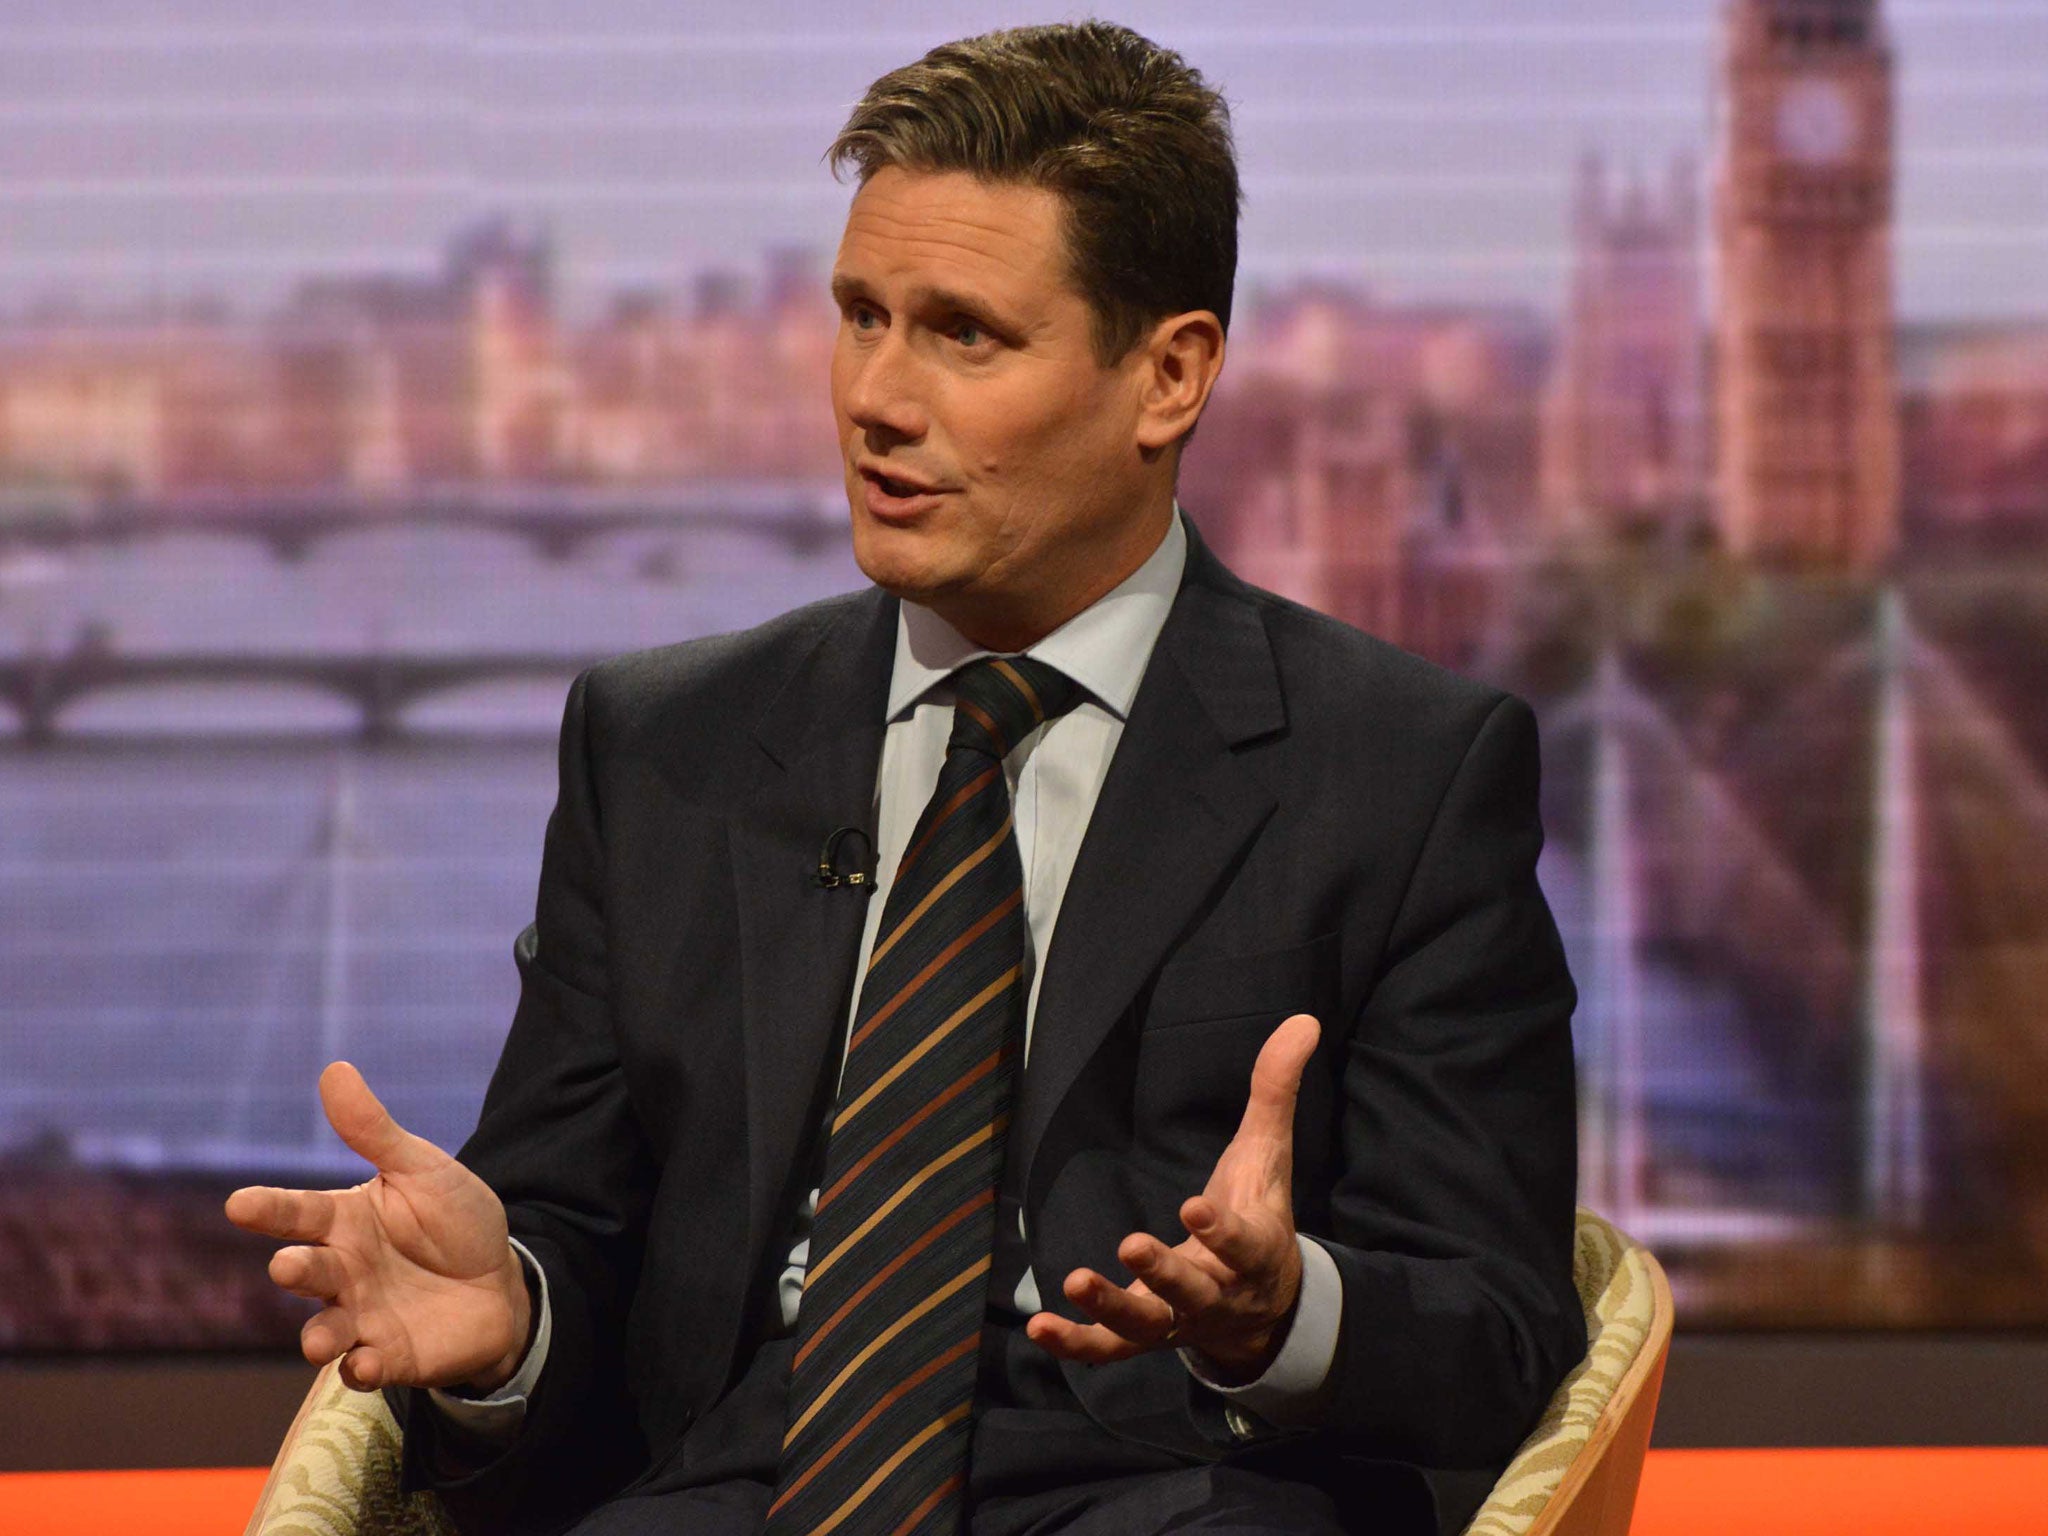 Keir Starmer, the outgoing head of the CPS, believes the Human Rights Act should not be amended in any way